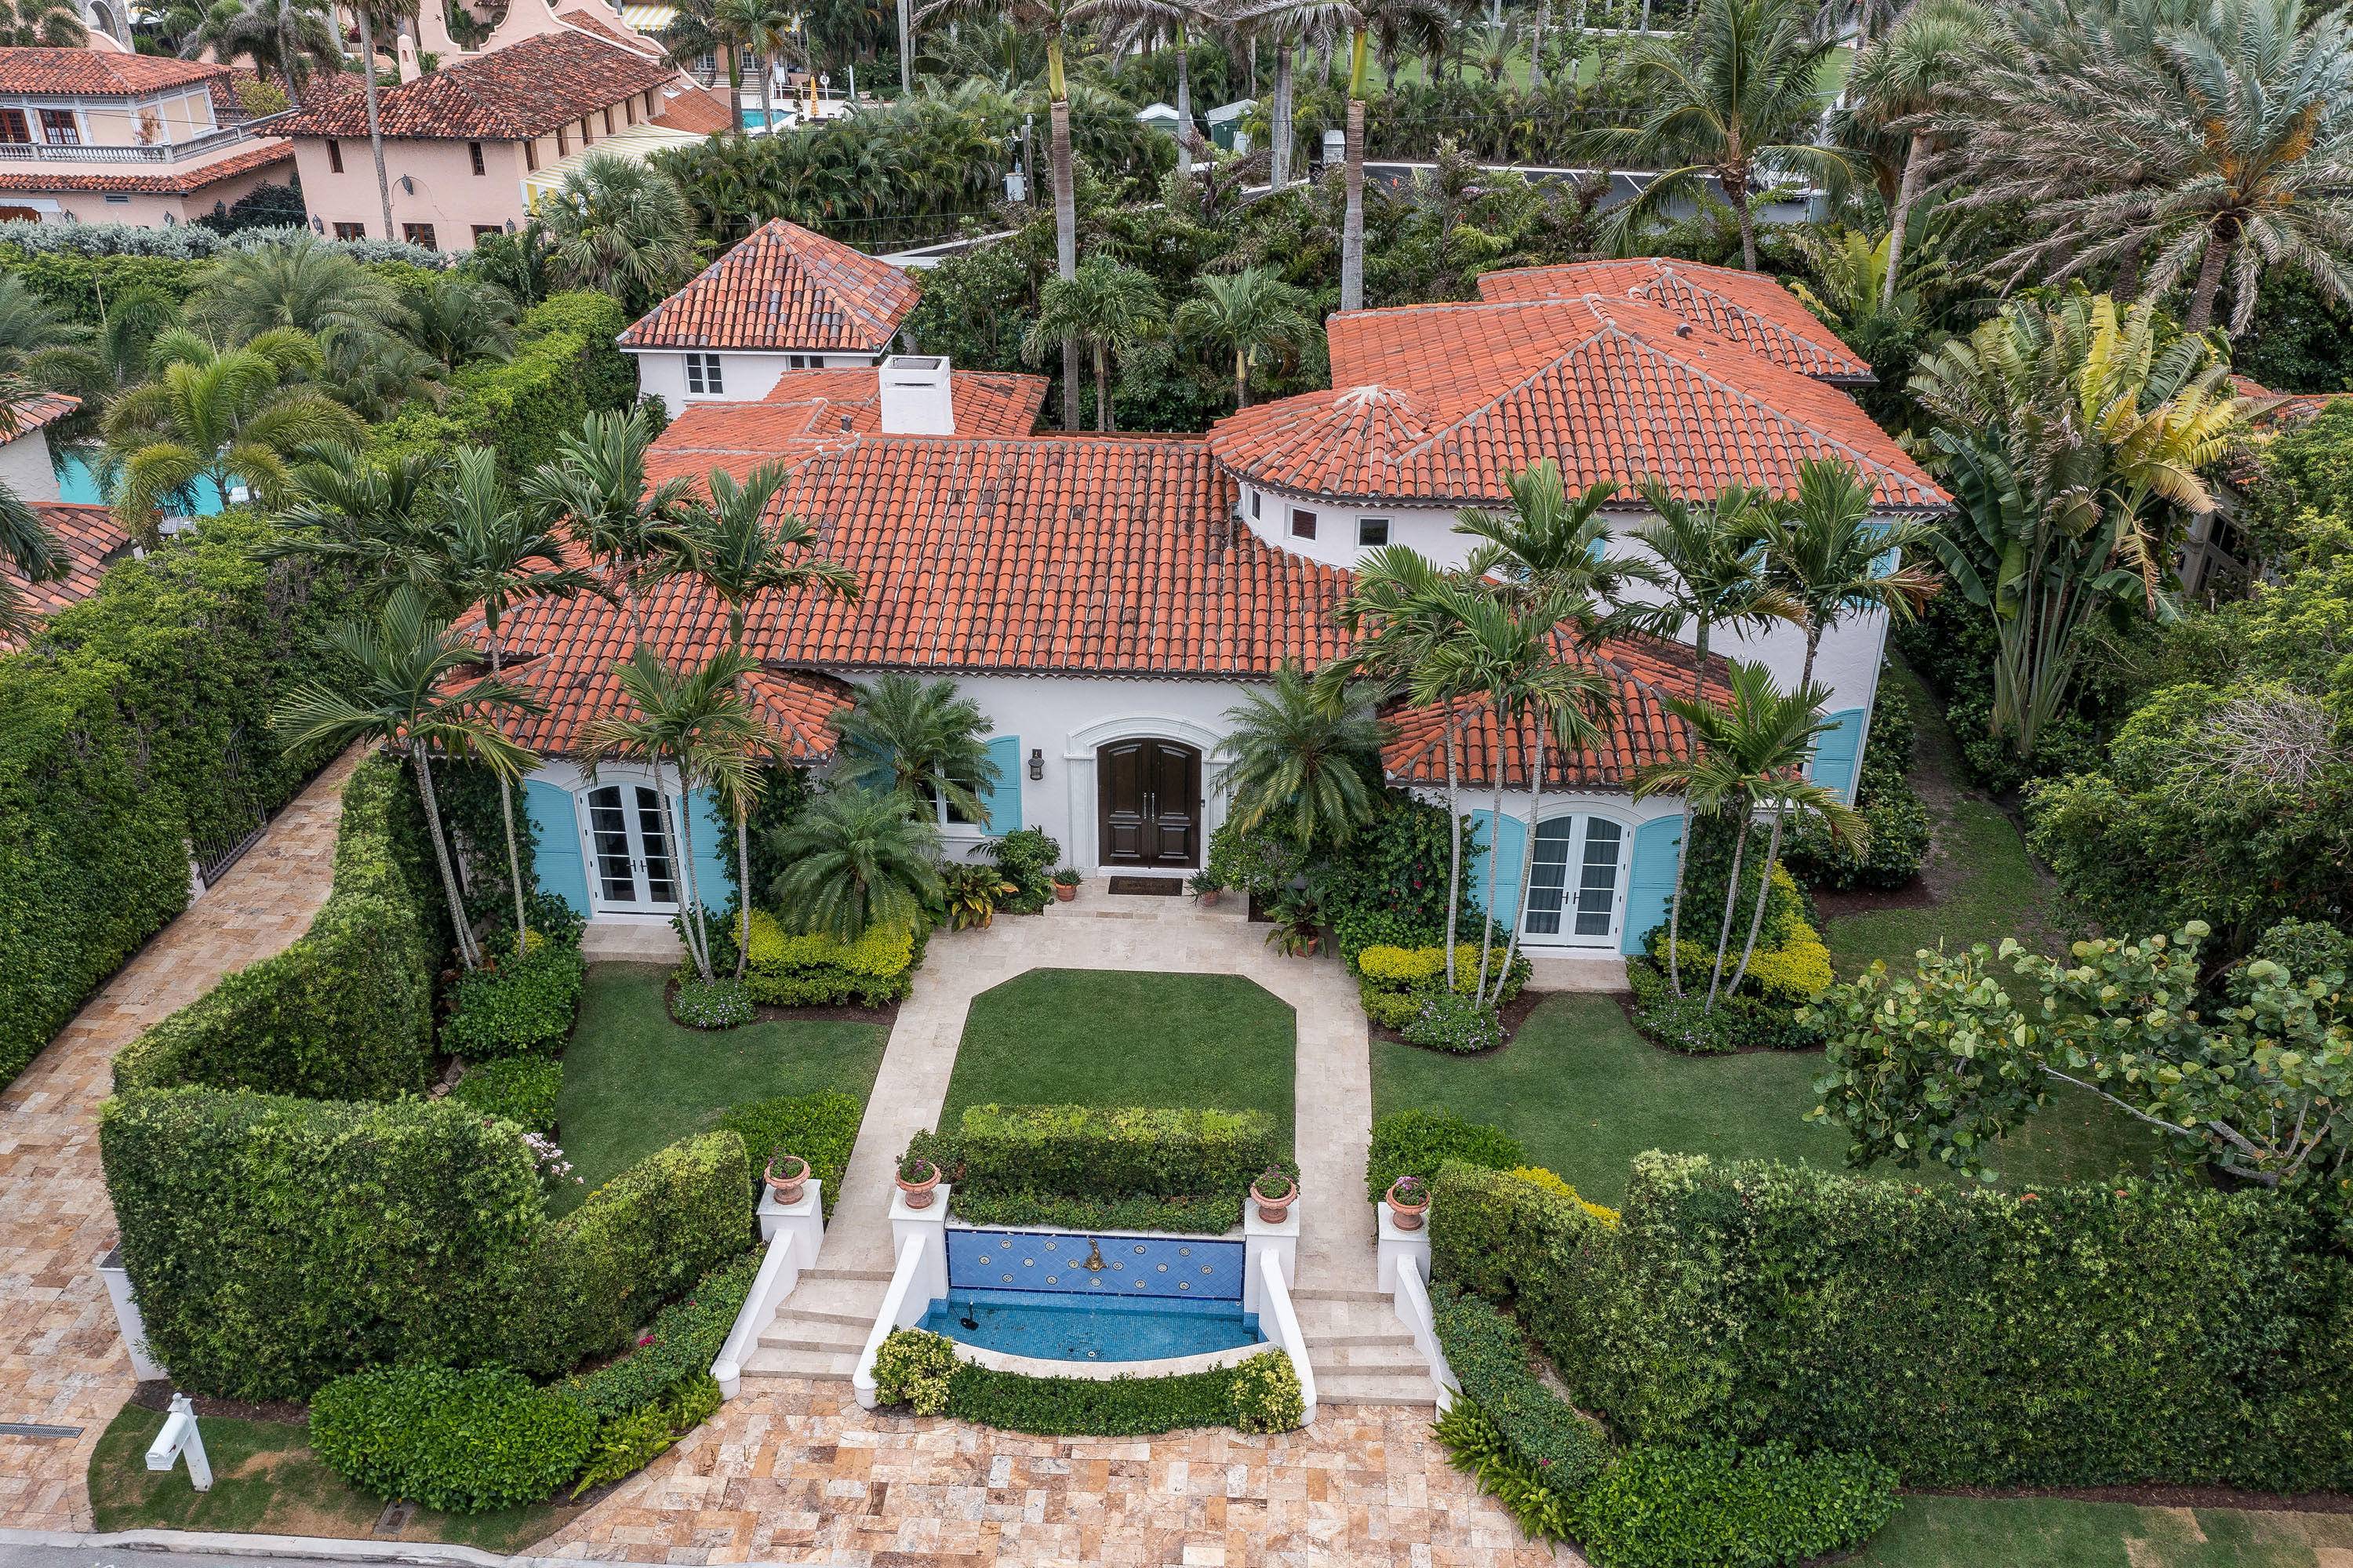 Enjoy this beautiful mediterranean 4BR 5BA home with 1BR 1BA carriage house in the Estate Section with waived Mar a Lago initiation fees.